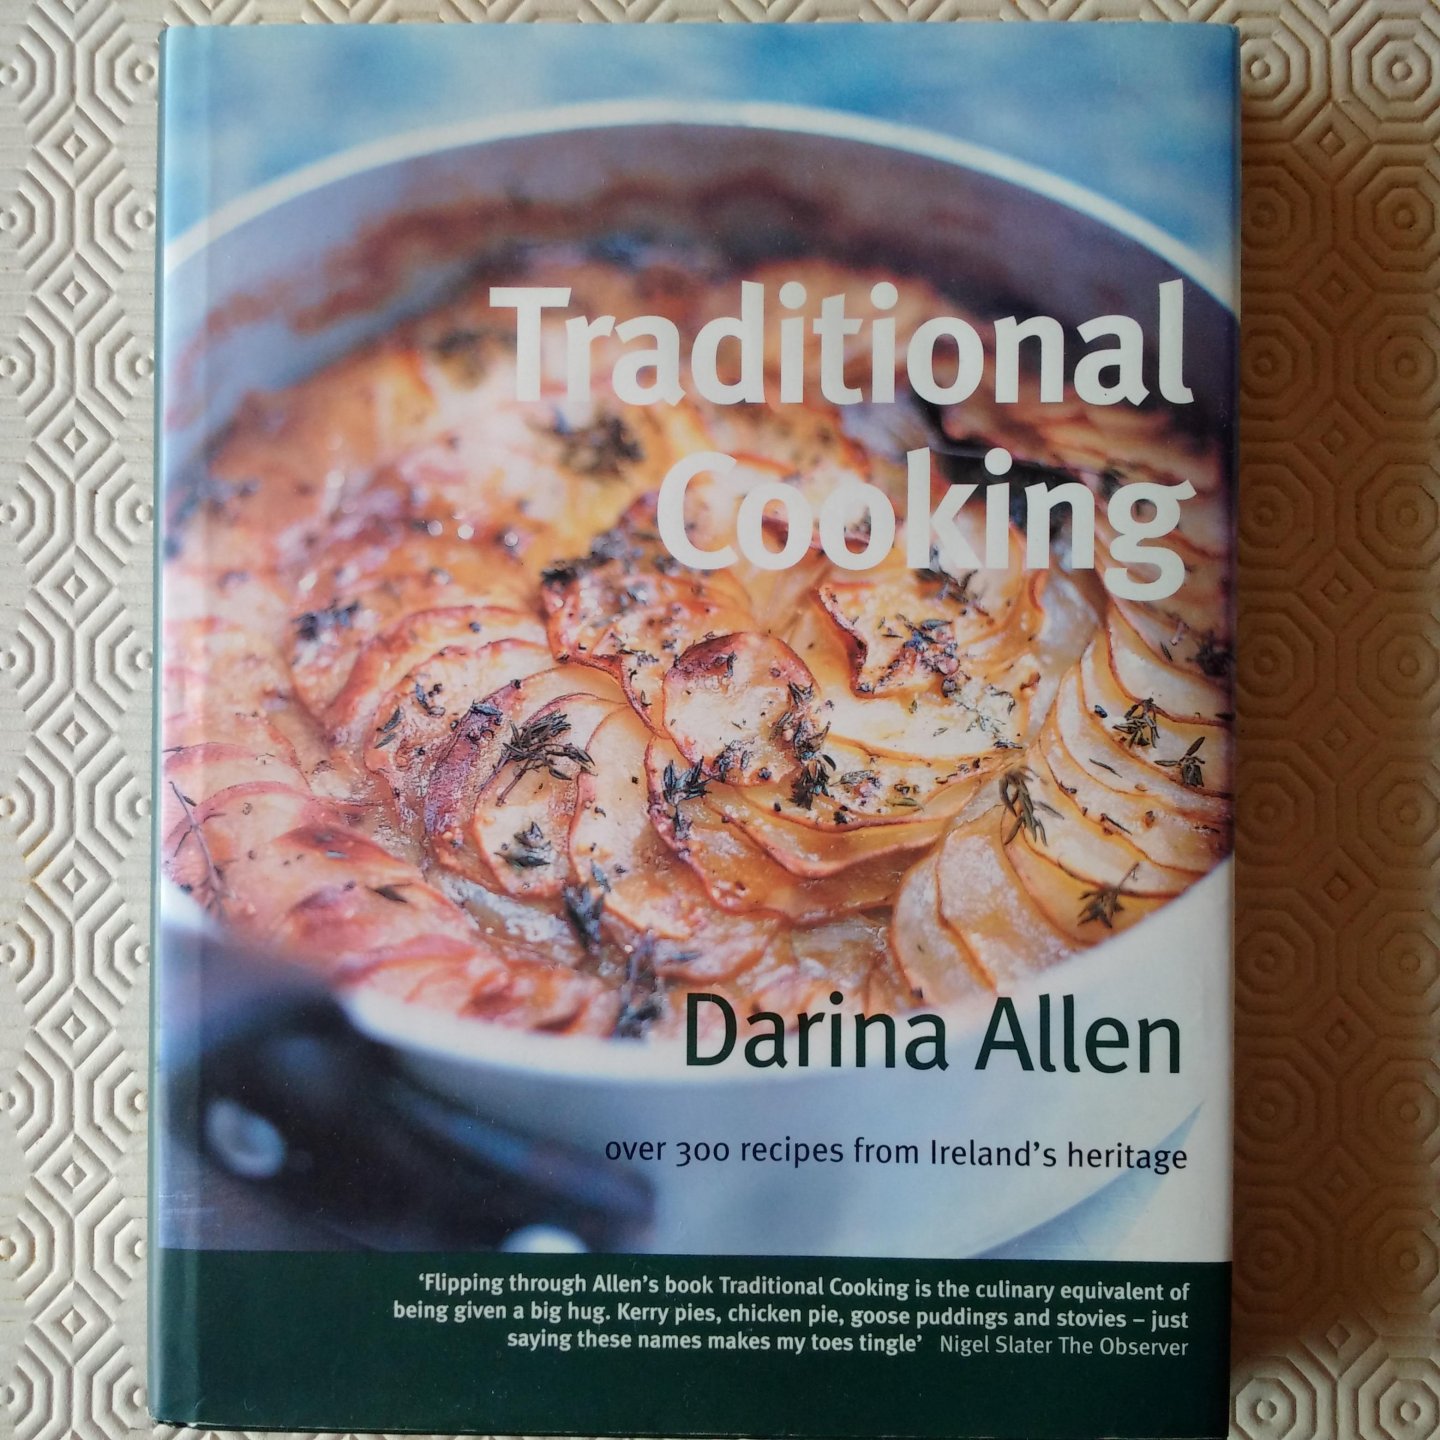 Allen, Darina - Traditional cooking, over 300 recipes from Ireland's heritage